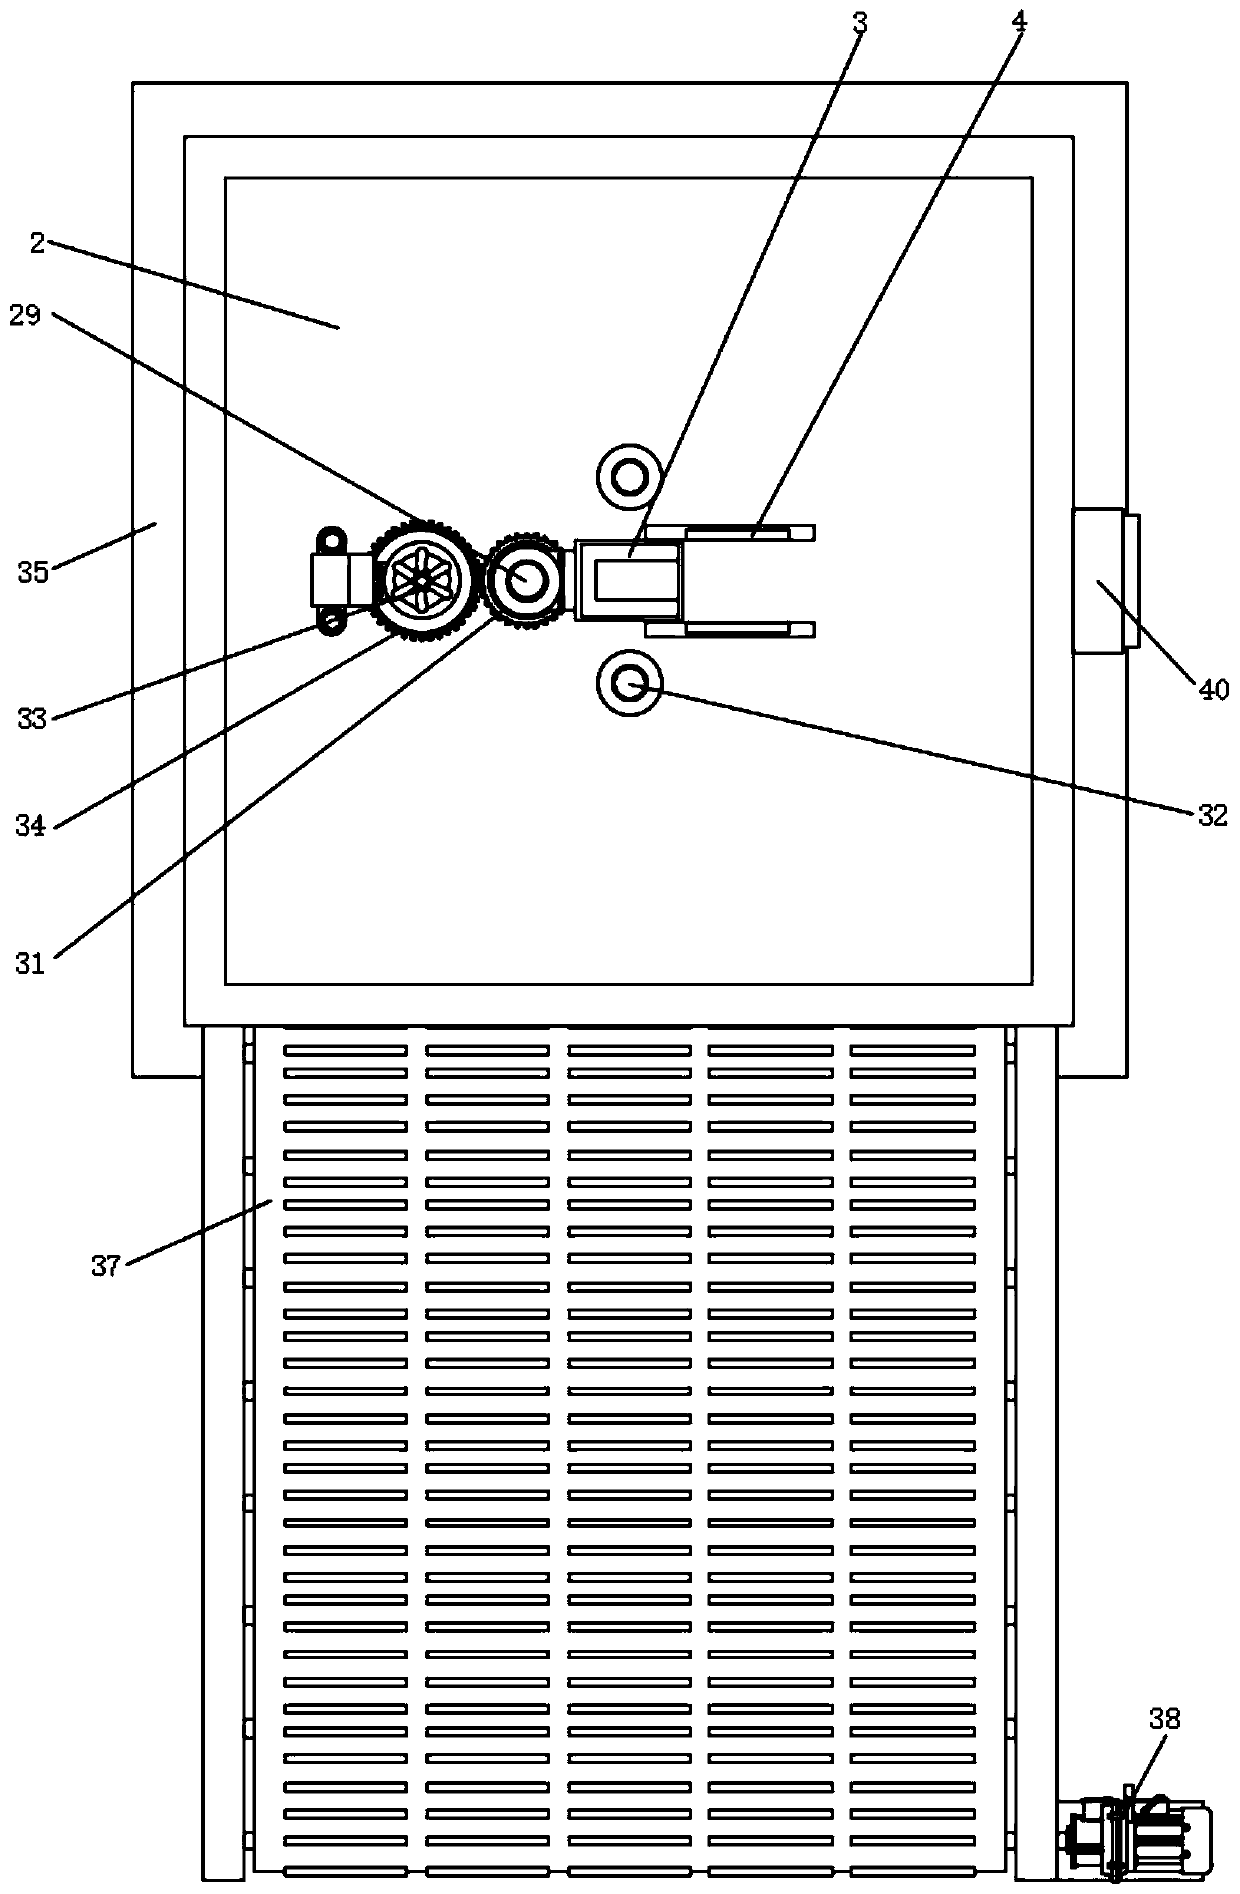 Stacking device with sorting mechanism for aluminum alloy homogenization